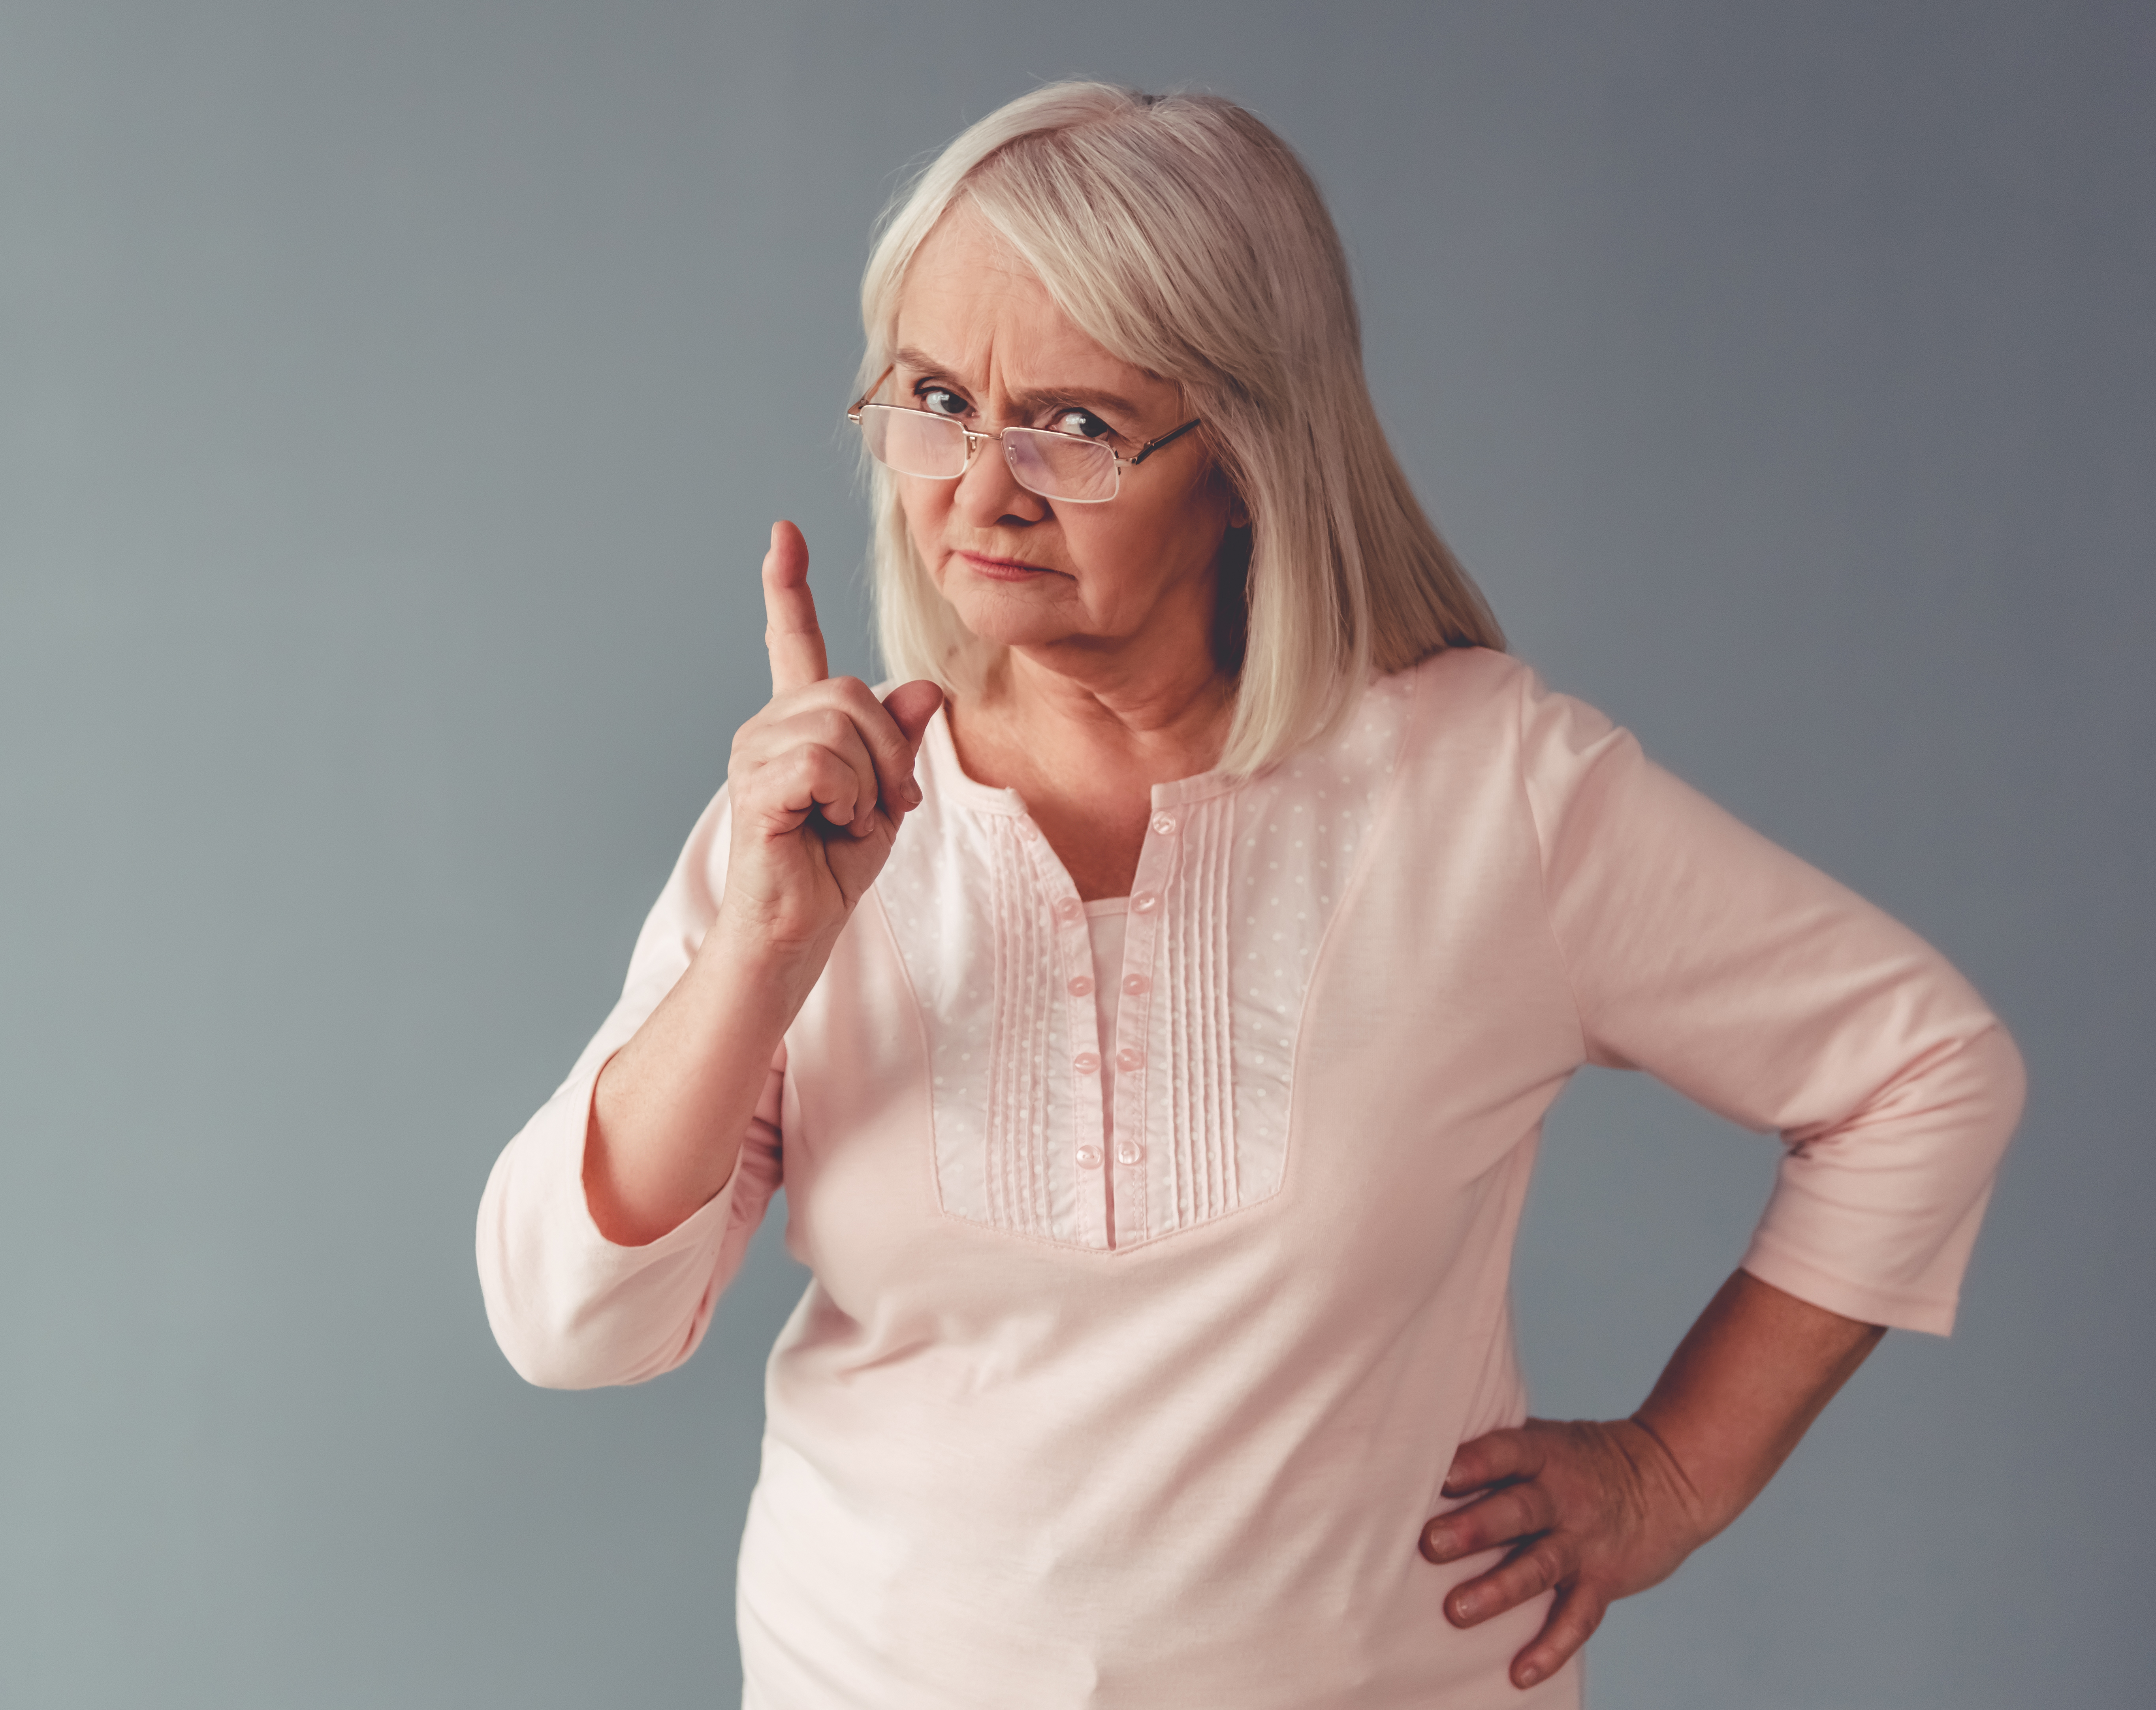 Angry older woman pointing a finger | Source: Shutterstock